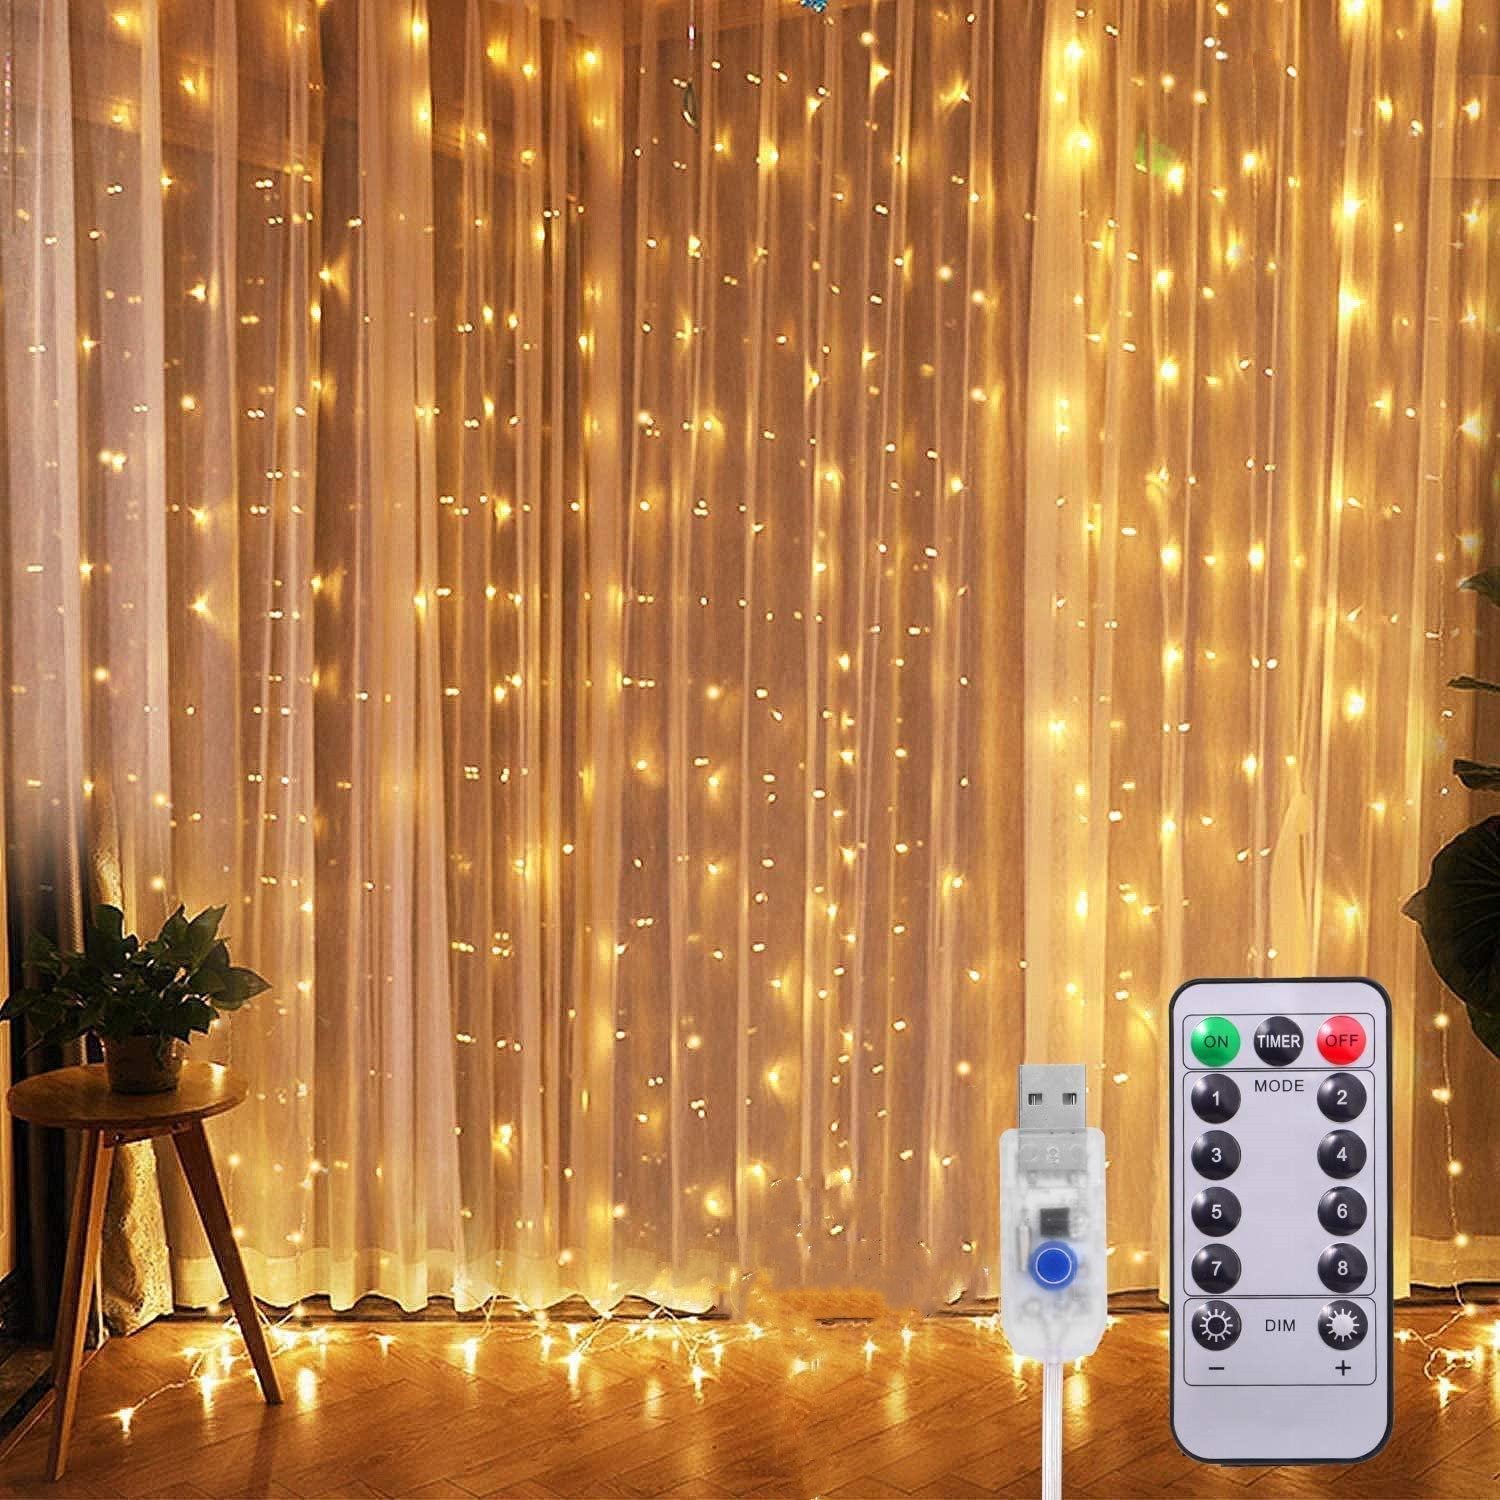 Fairy Curtain String Lights, 9.8 x 9.8 ft Curtain of String Lights with Remote Control, 300 LED Indoor Outdoor Decorative Christmas Twinkle Lights for Bedroom, Patio, Party Wedding(Warm White)